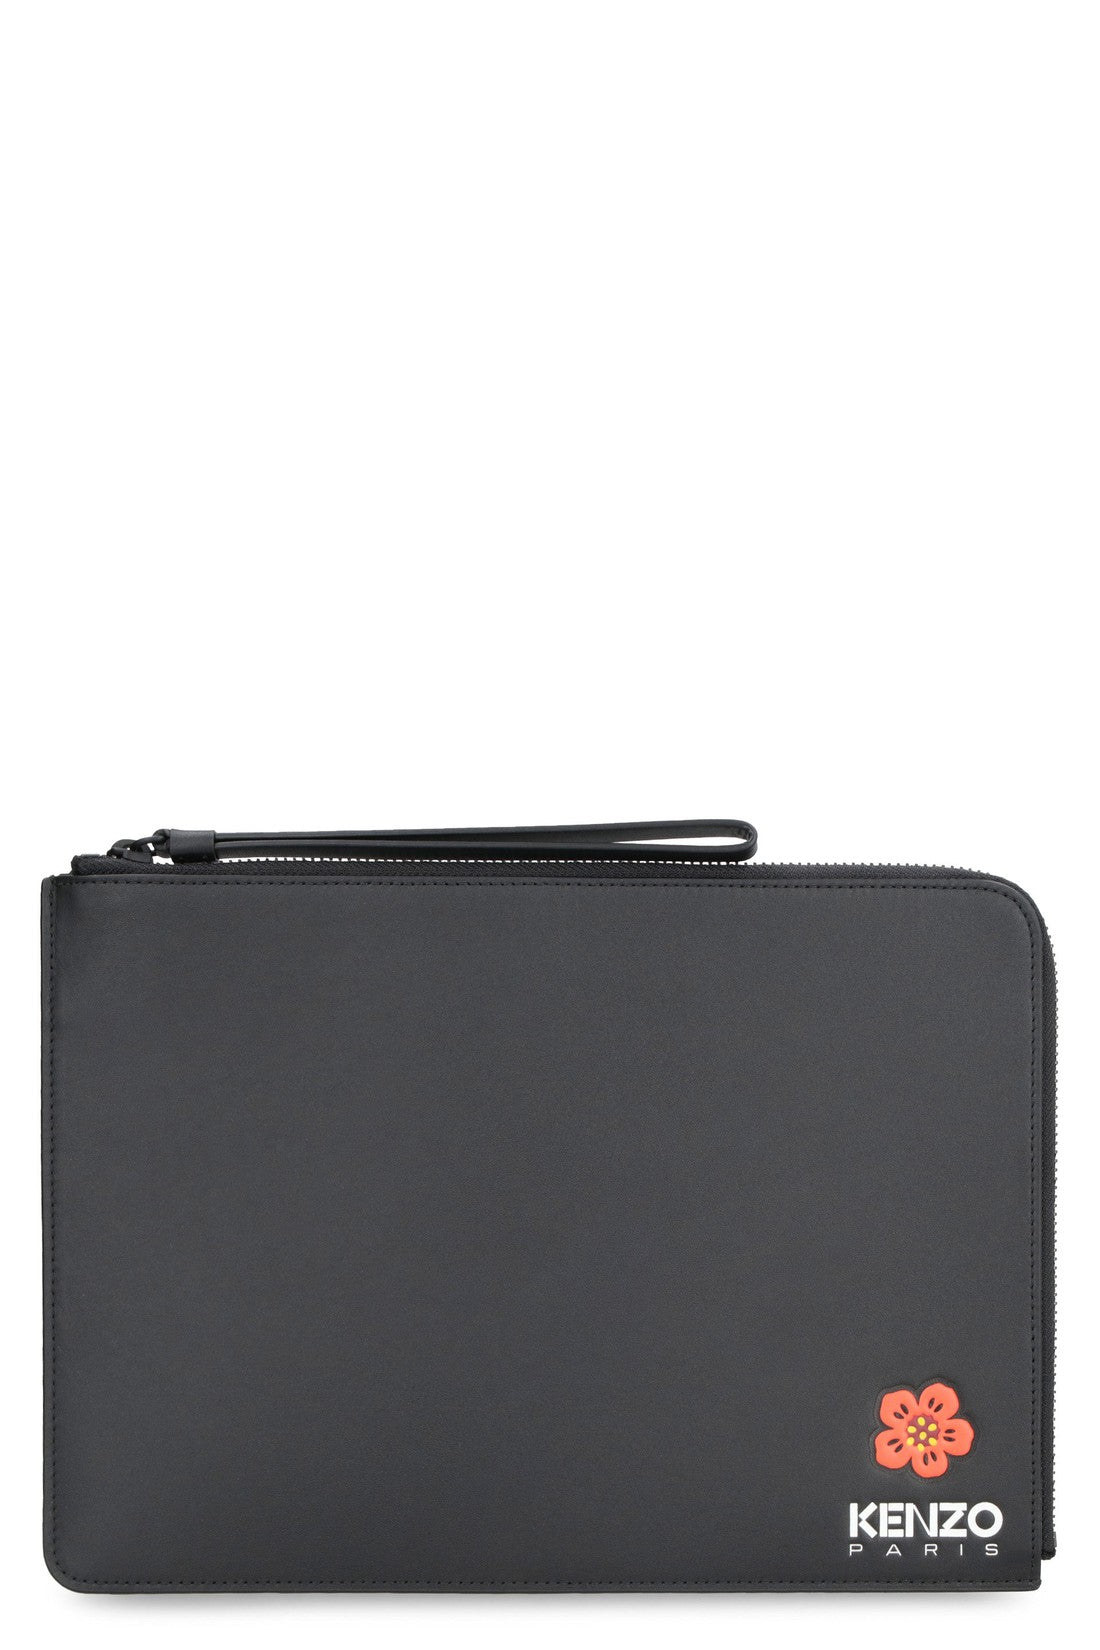 Kenzo-OUTLET-SALE-Leather flat pouch-ARCHIVIST